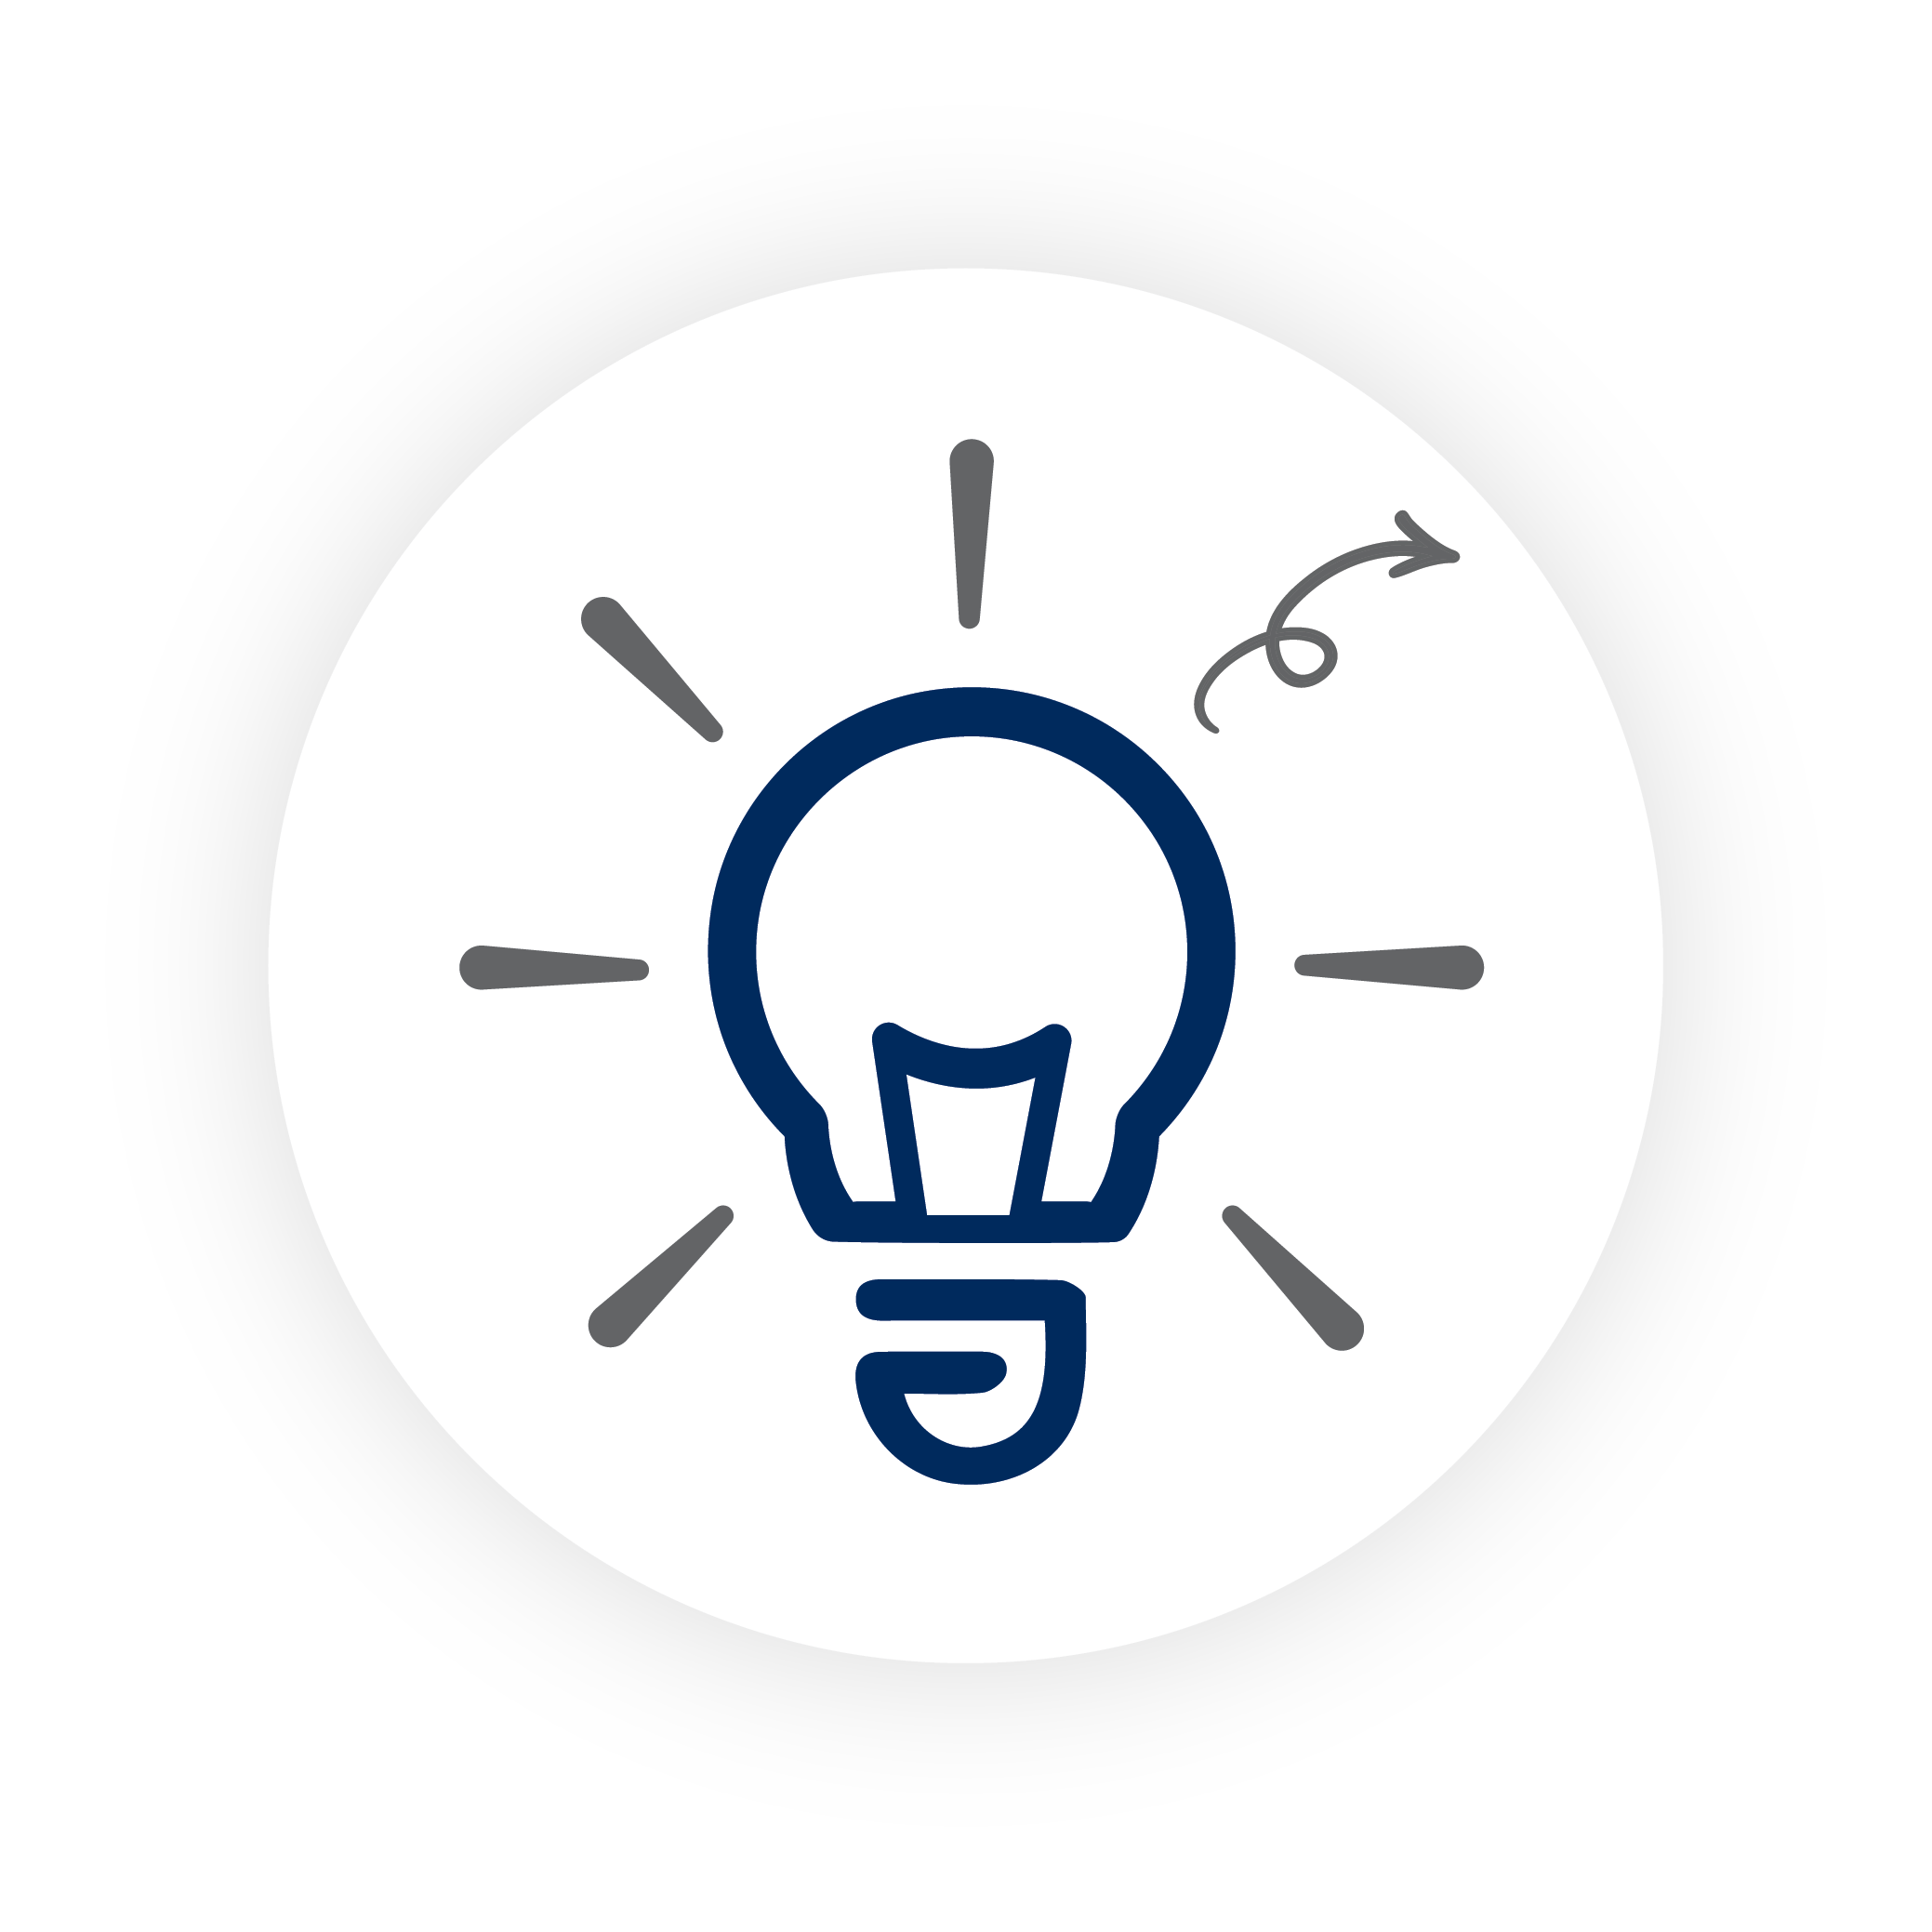 Light bulb icon as a placeholder